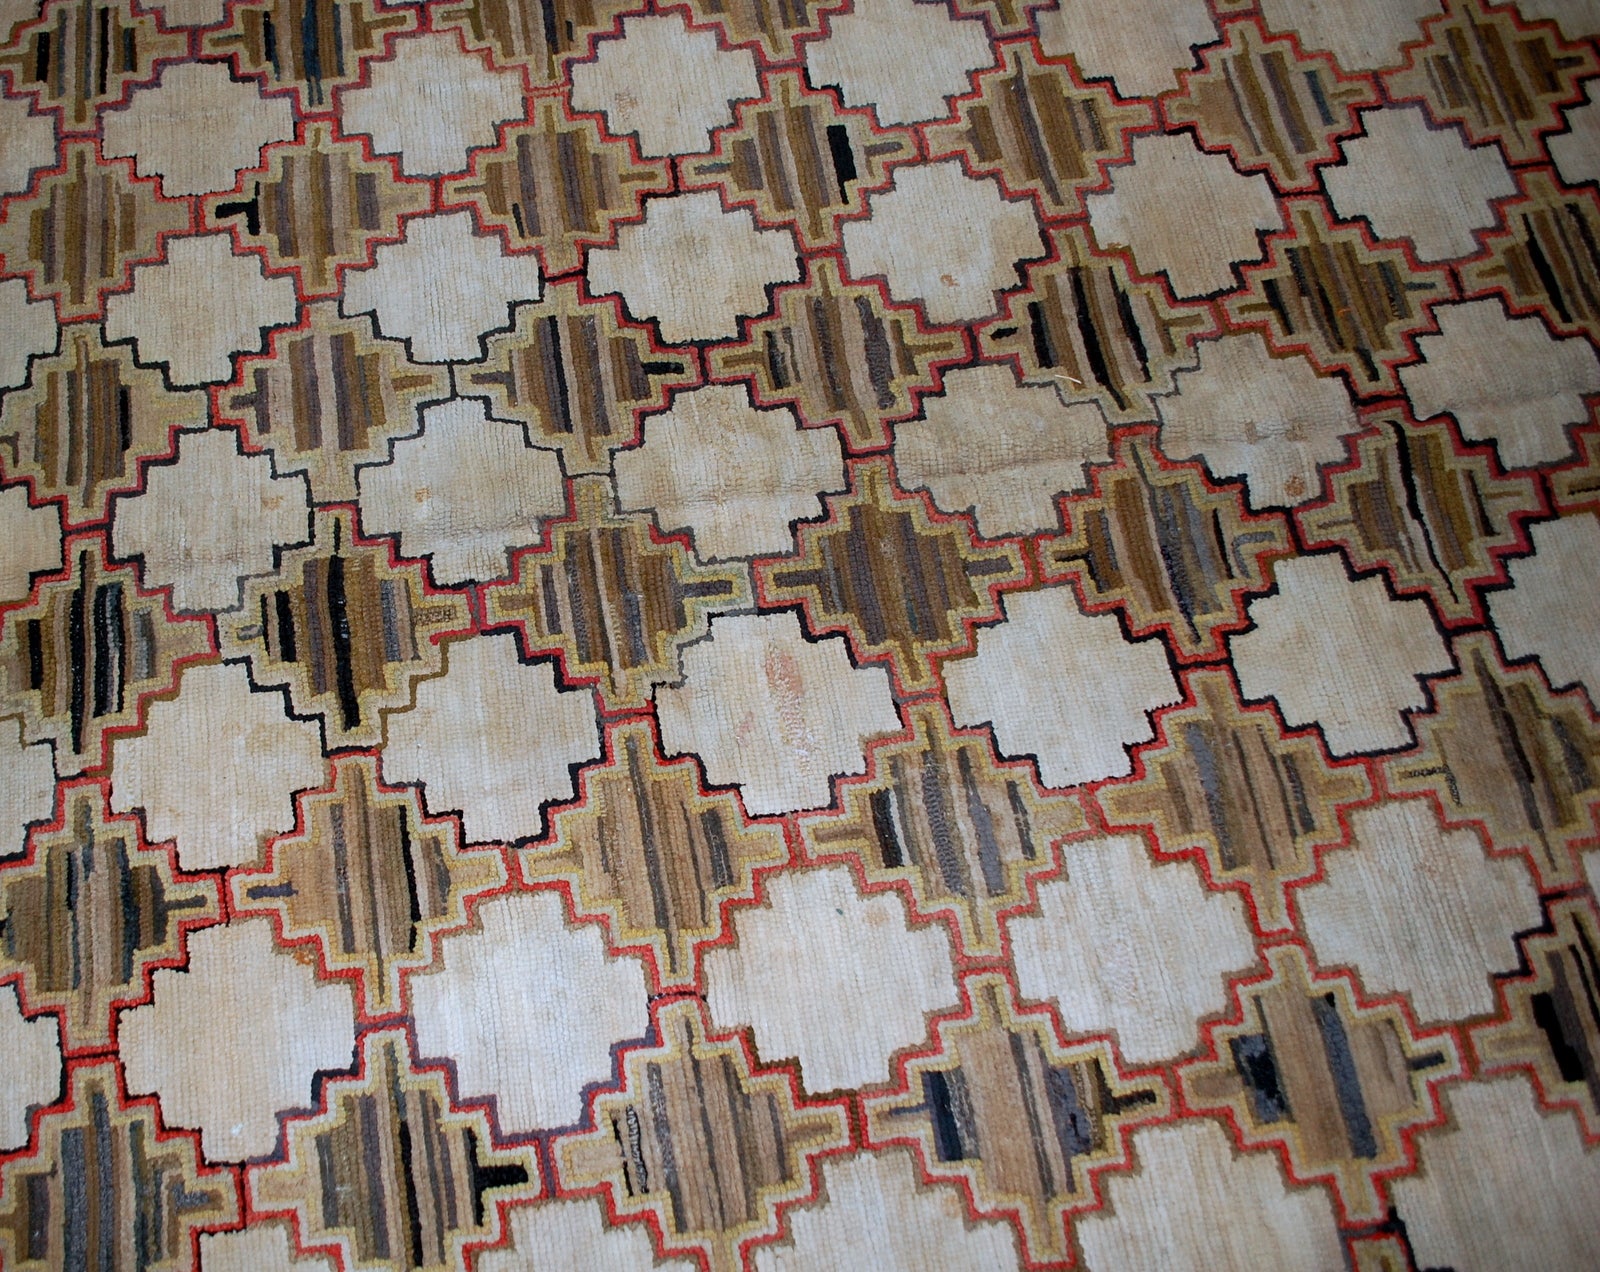 Antique geometric American hooked rug from the end of 19th century. It is in good condition, made out of wool.